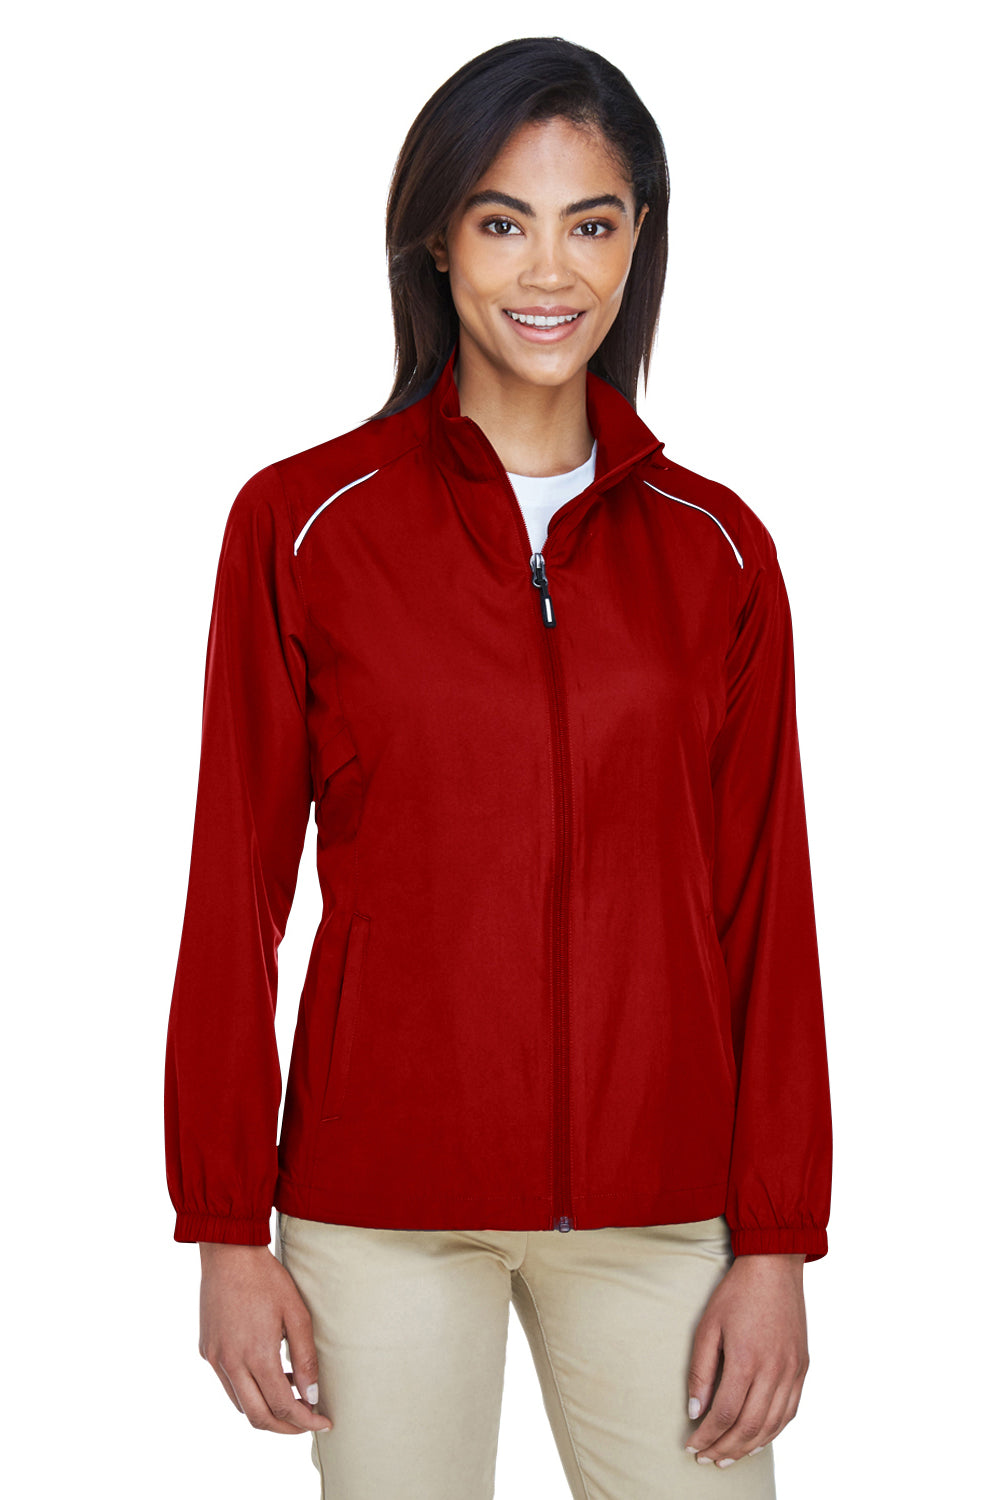 Core 365 78183 Womens Motivate Water Resistant Full Zip Jacket Red Front